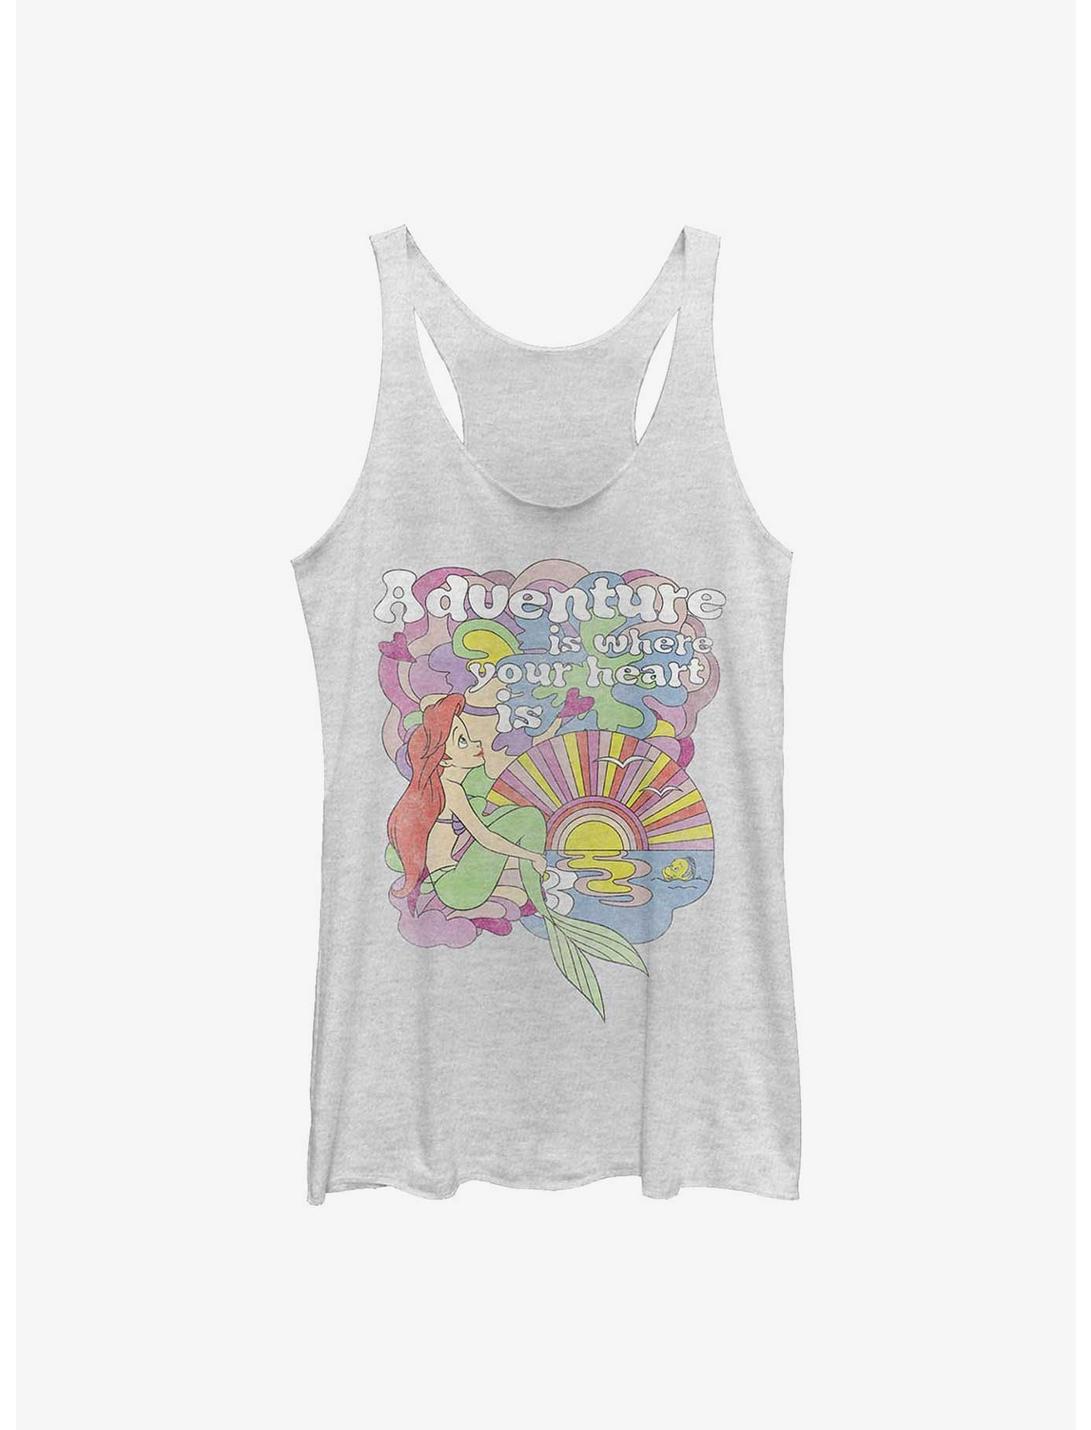 Disney The Little Mermaid Adventure Is Where Your Heart Is Womens Tank Top, WHITE, hi-res